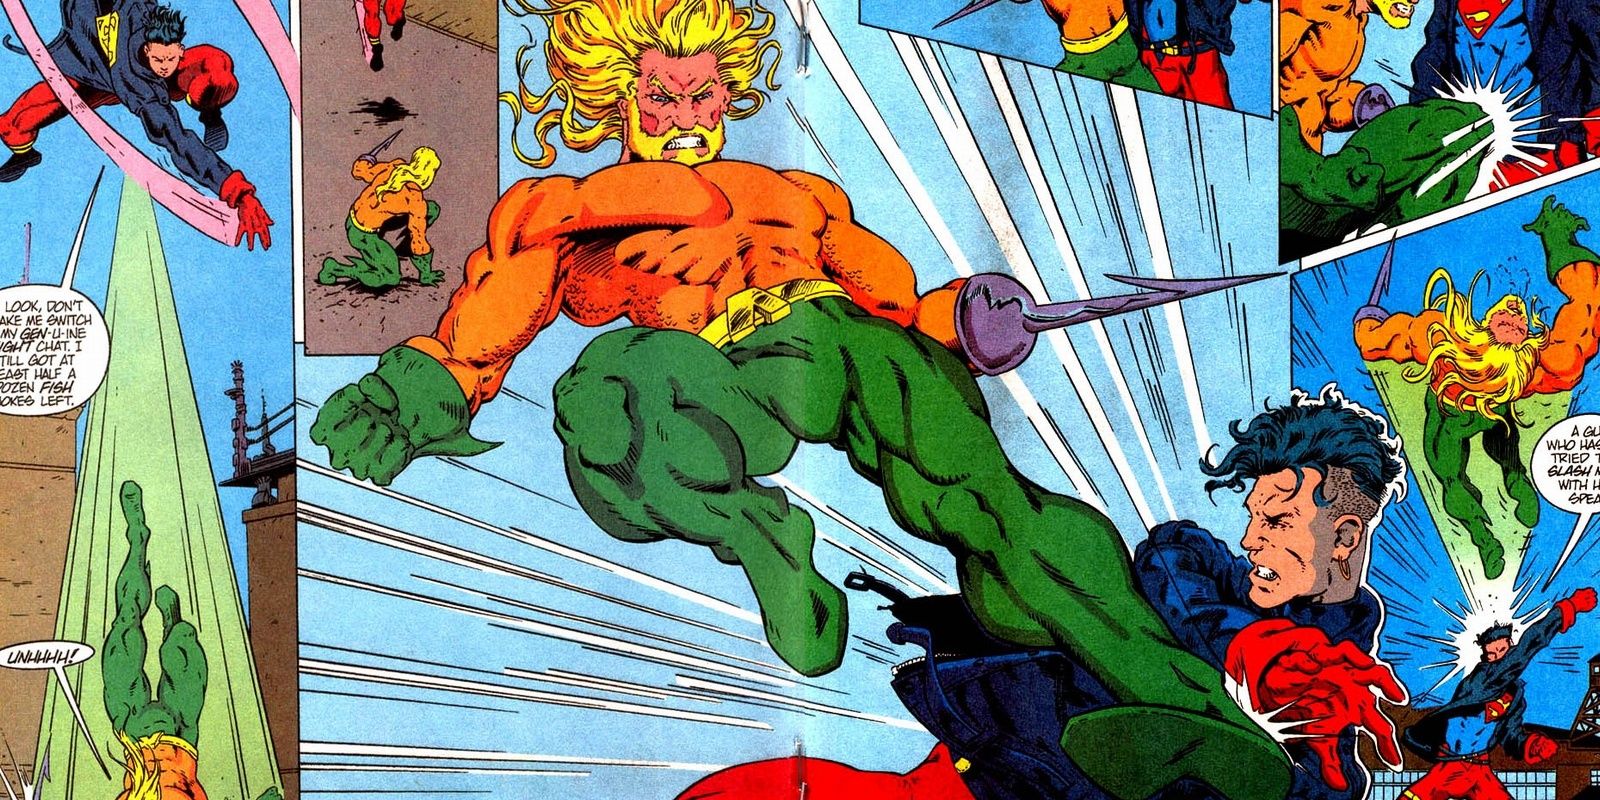 Aquaman kicking Superboy in the chest